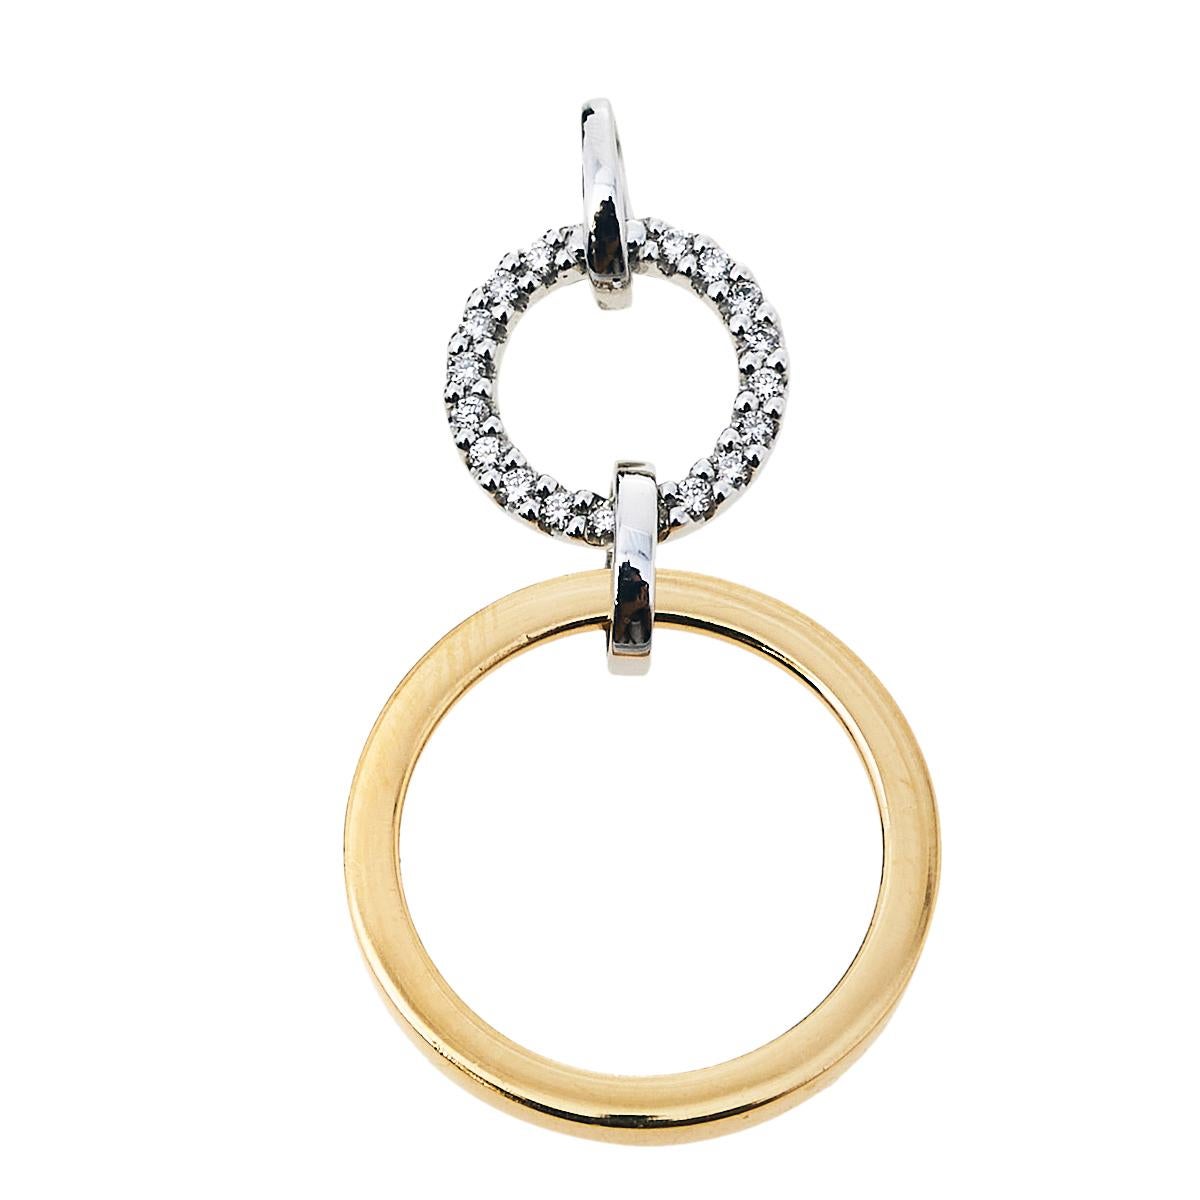 One look at this pendant by Bernhard H. Mayer and you'll know that beauty can come in small things too. Crafted from 18k gold, this pendant flaunts two differently-sized rings attached to one another. While the yellow gold ring represents the Sun,